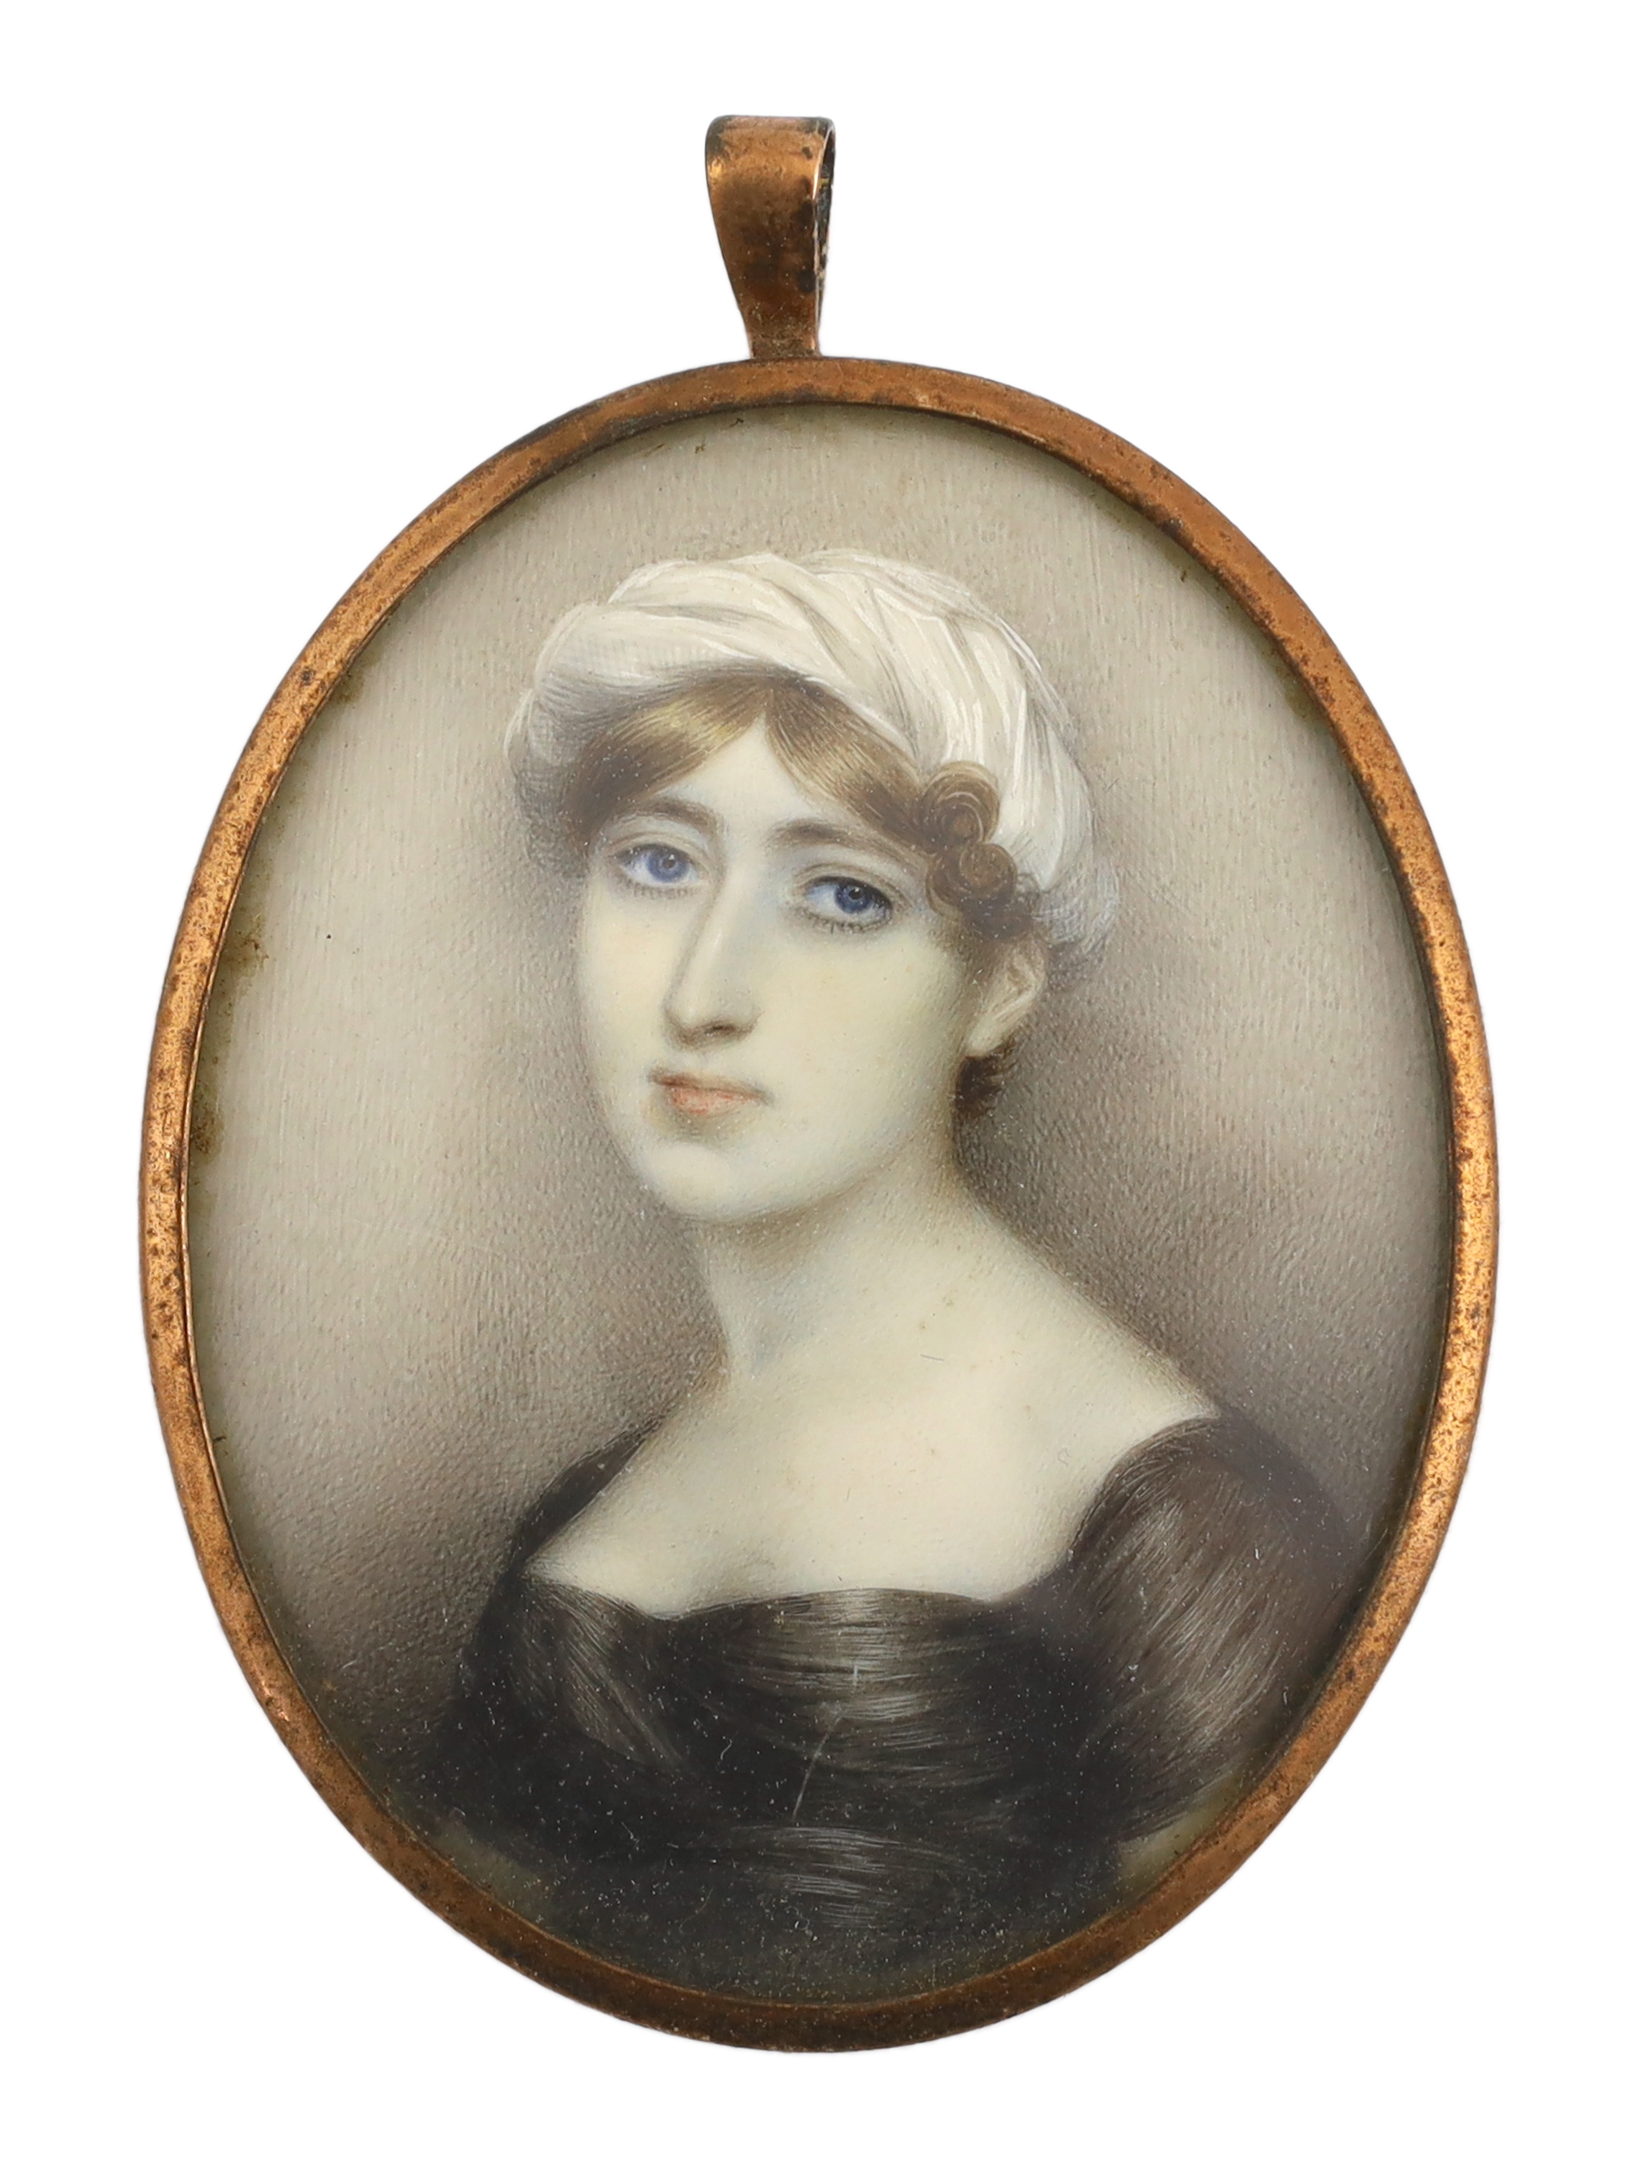 English School circa 1820, Portrait miniature of a lady, watercolour on ivory, 7.8 x 6.3cm. CITES Submission reference TT8FC95L